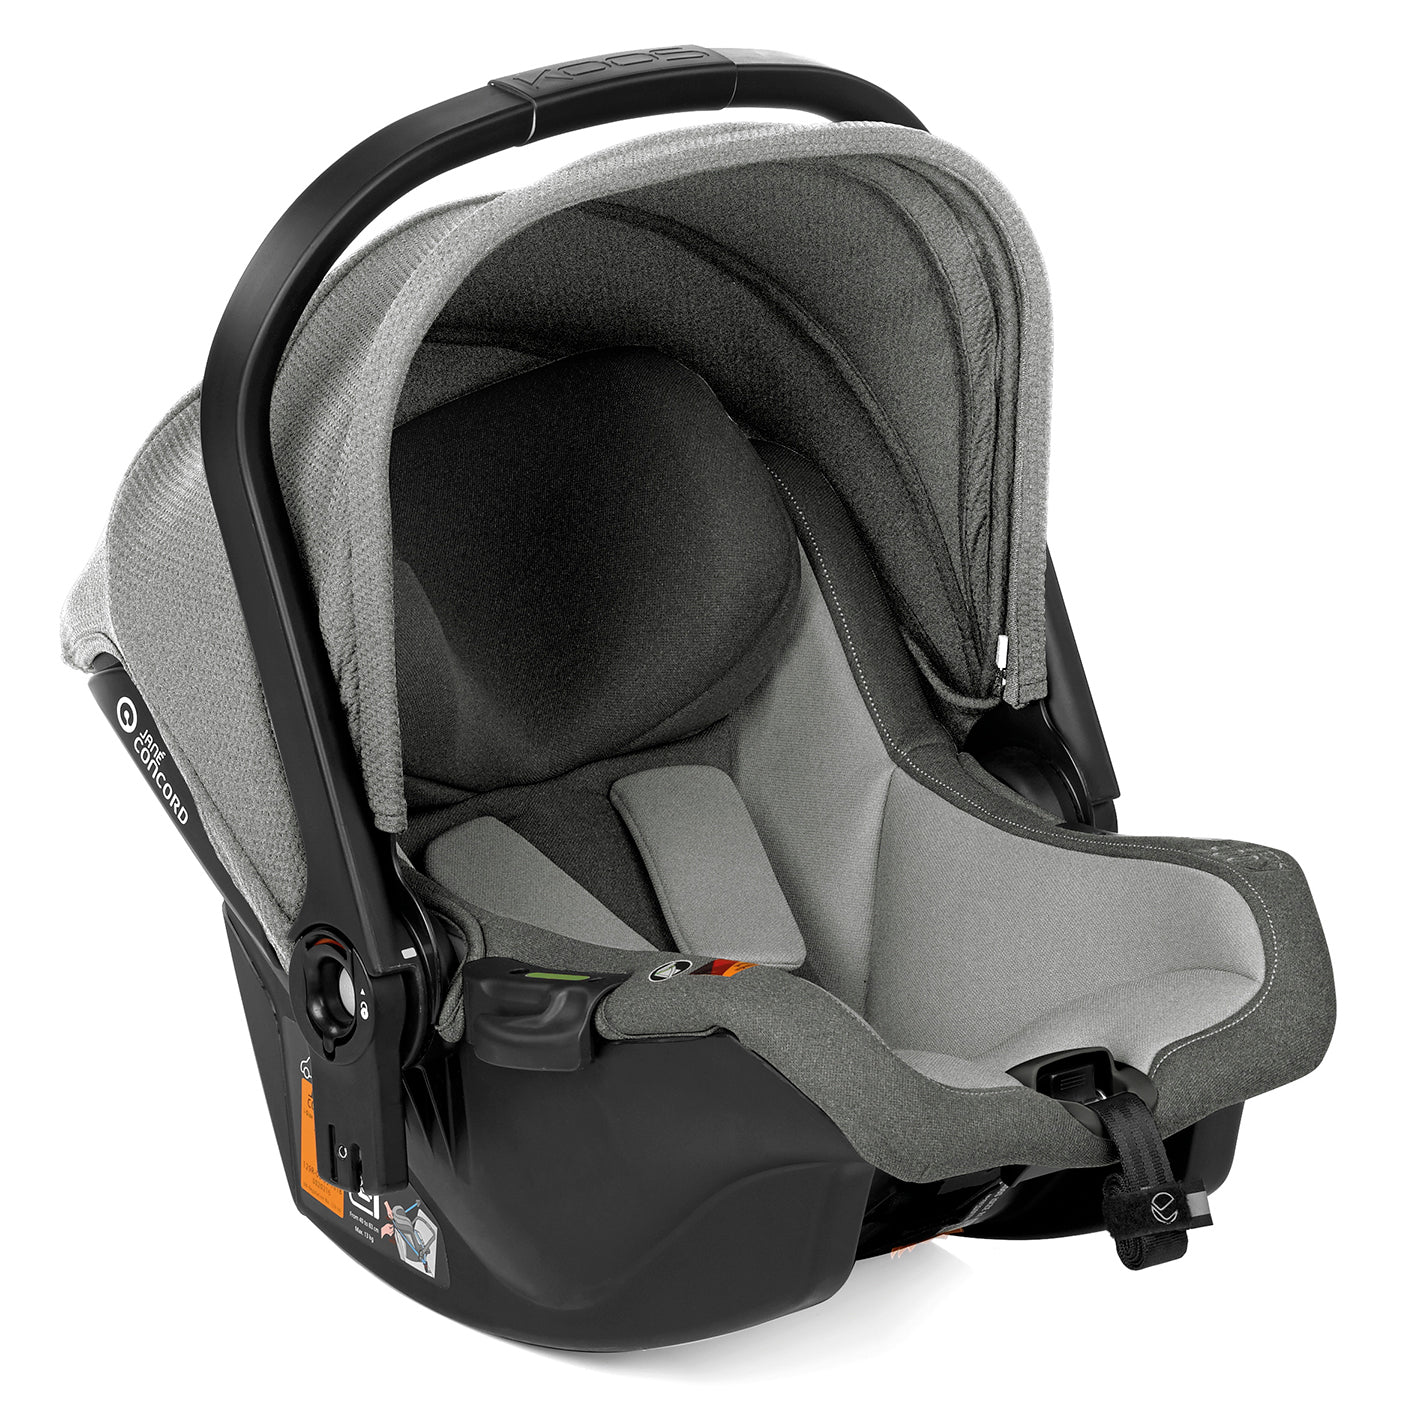 Jané Koos iSize R1, 40-83cm 0-18 months Baby Car Seat - Kidsly